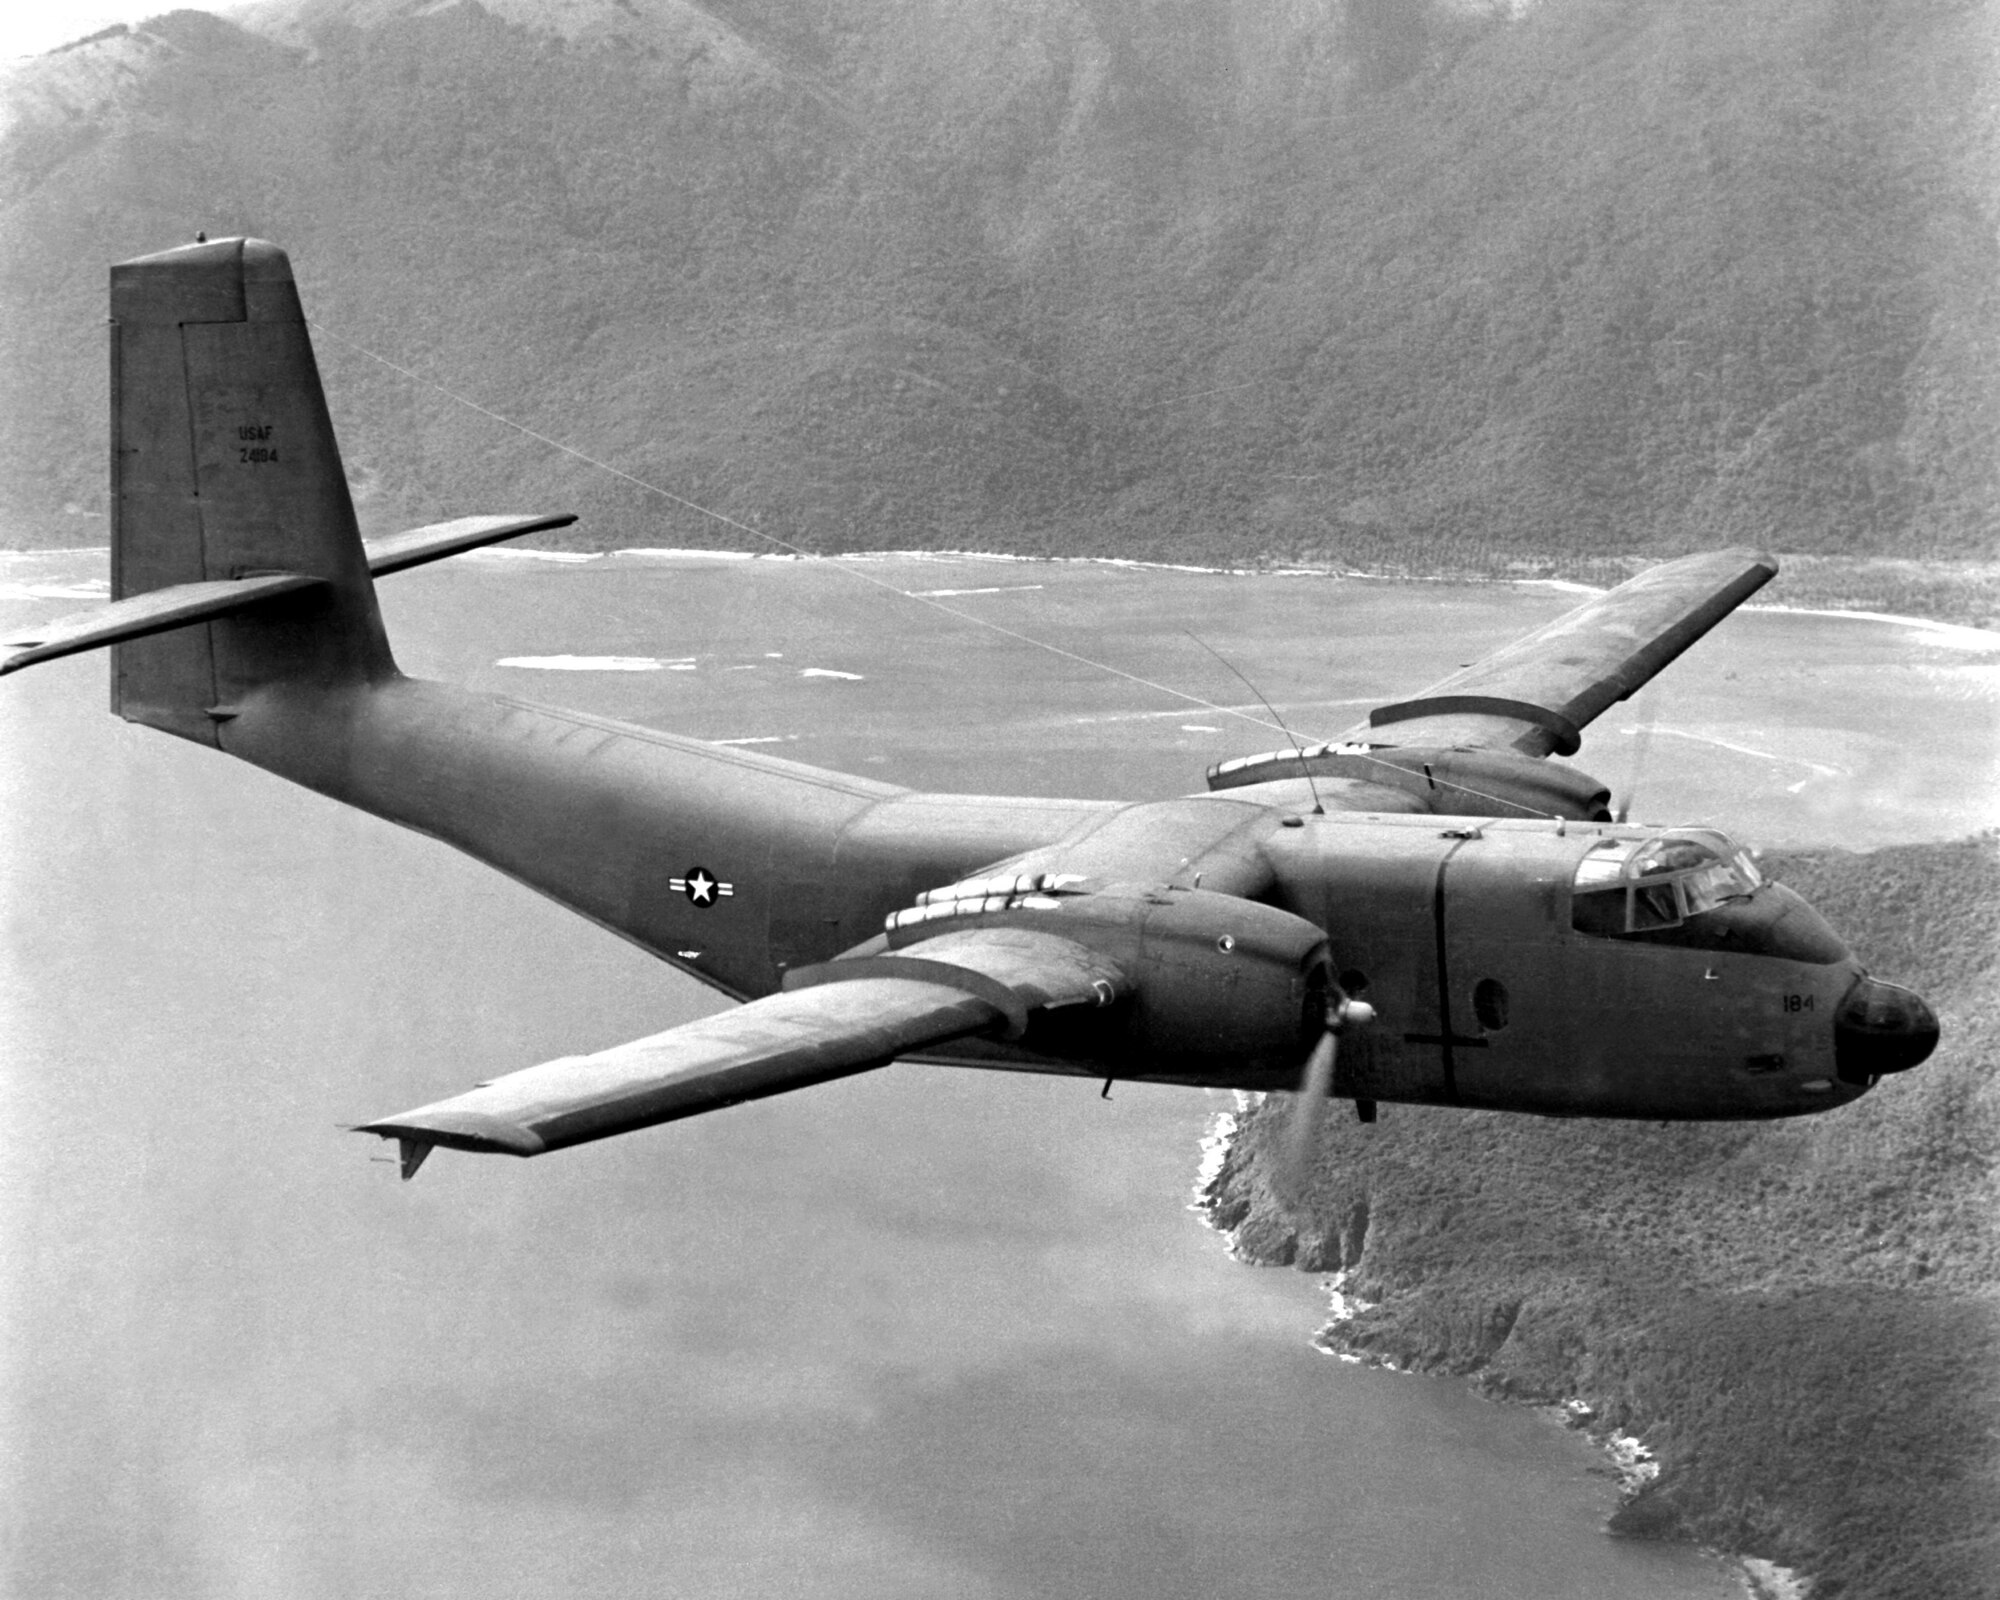 A black and white image of an old military aircraft flying over mountains.